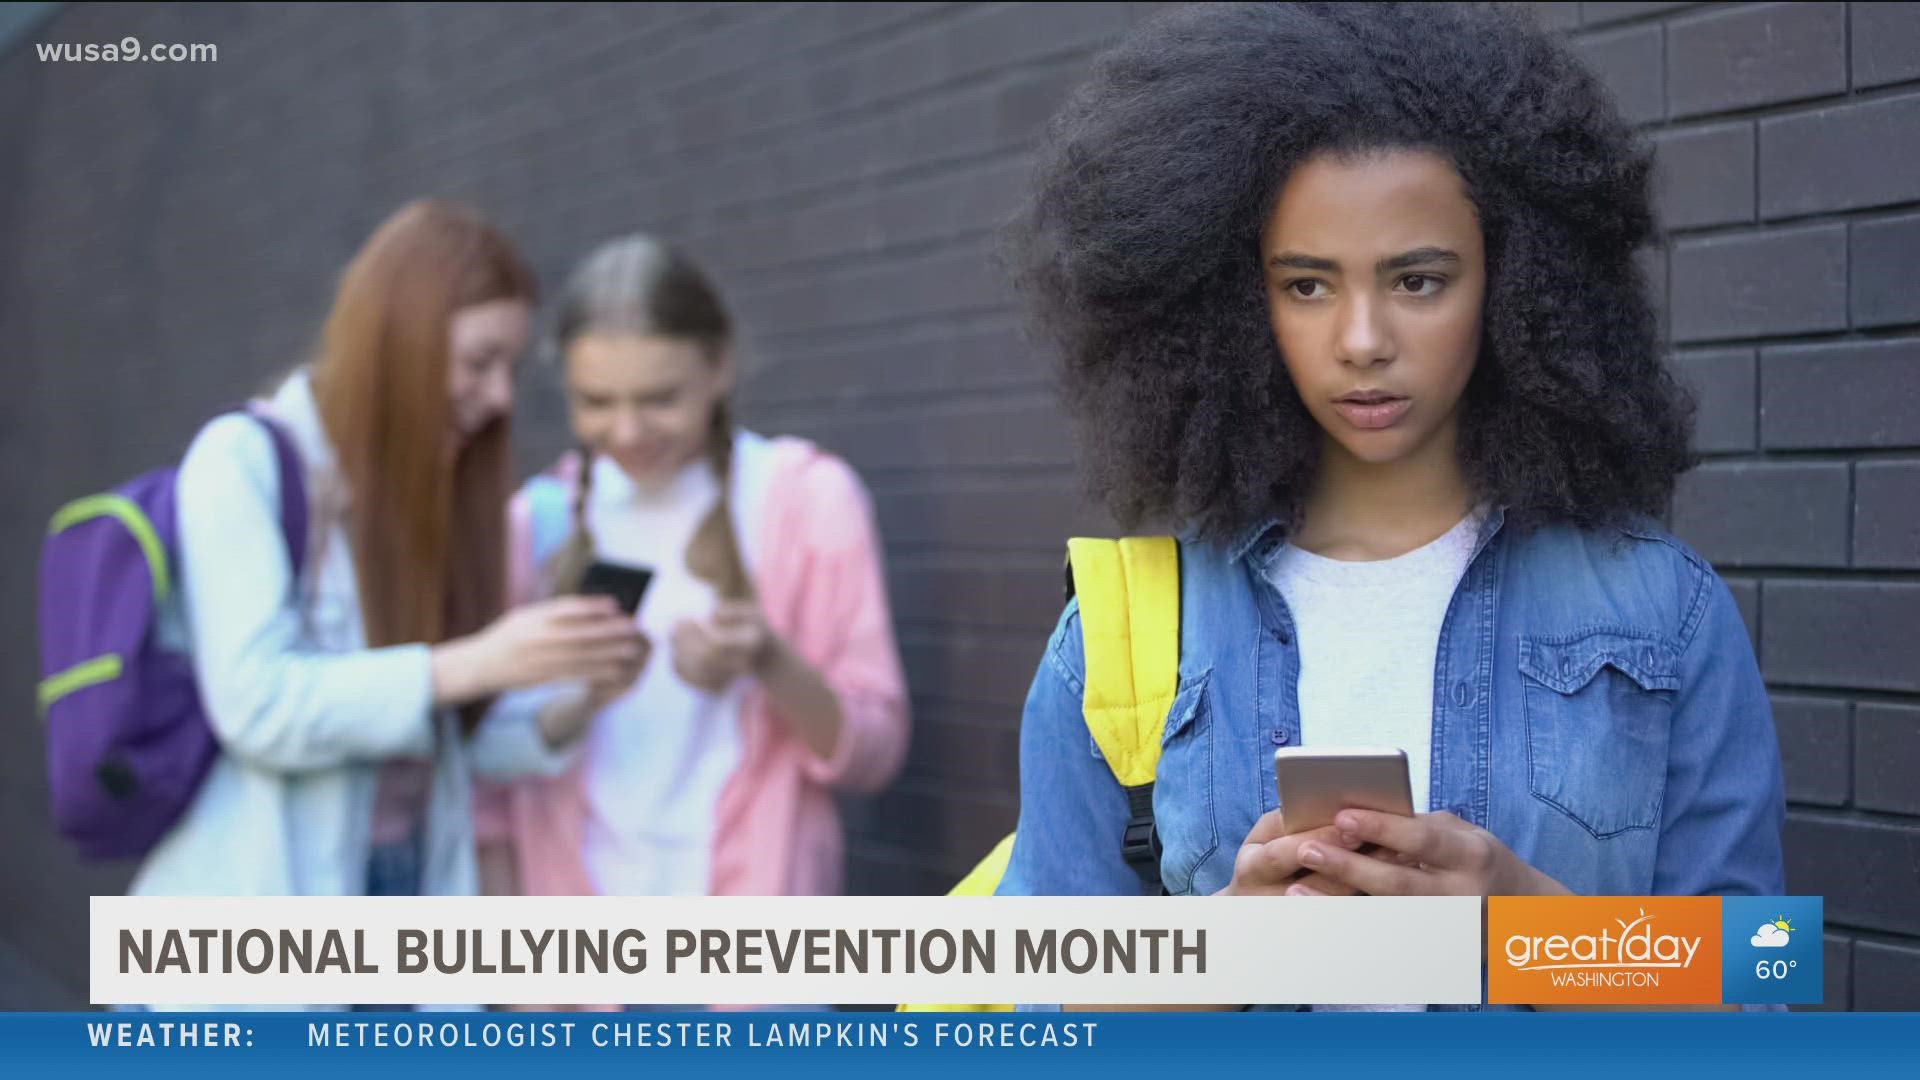 Dr. Bradley Nelson, author of "The Emotion Code" shares tips on what you can do if your child is the bully.